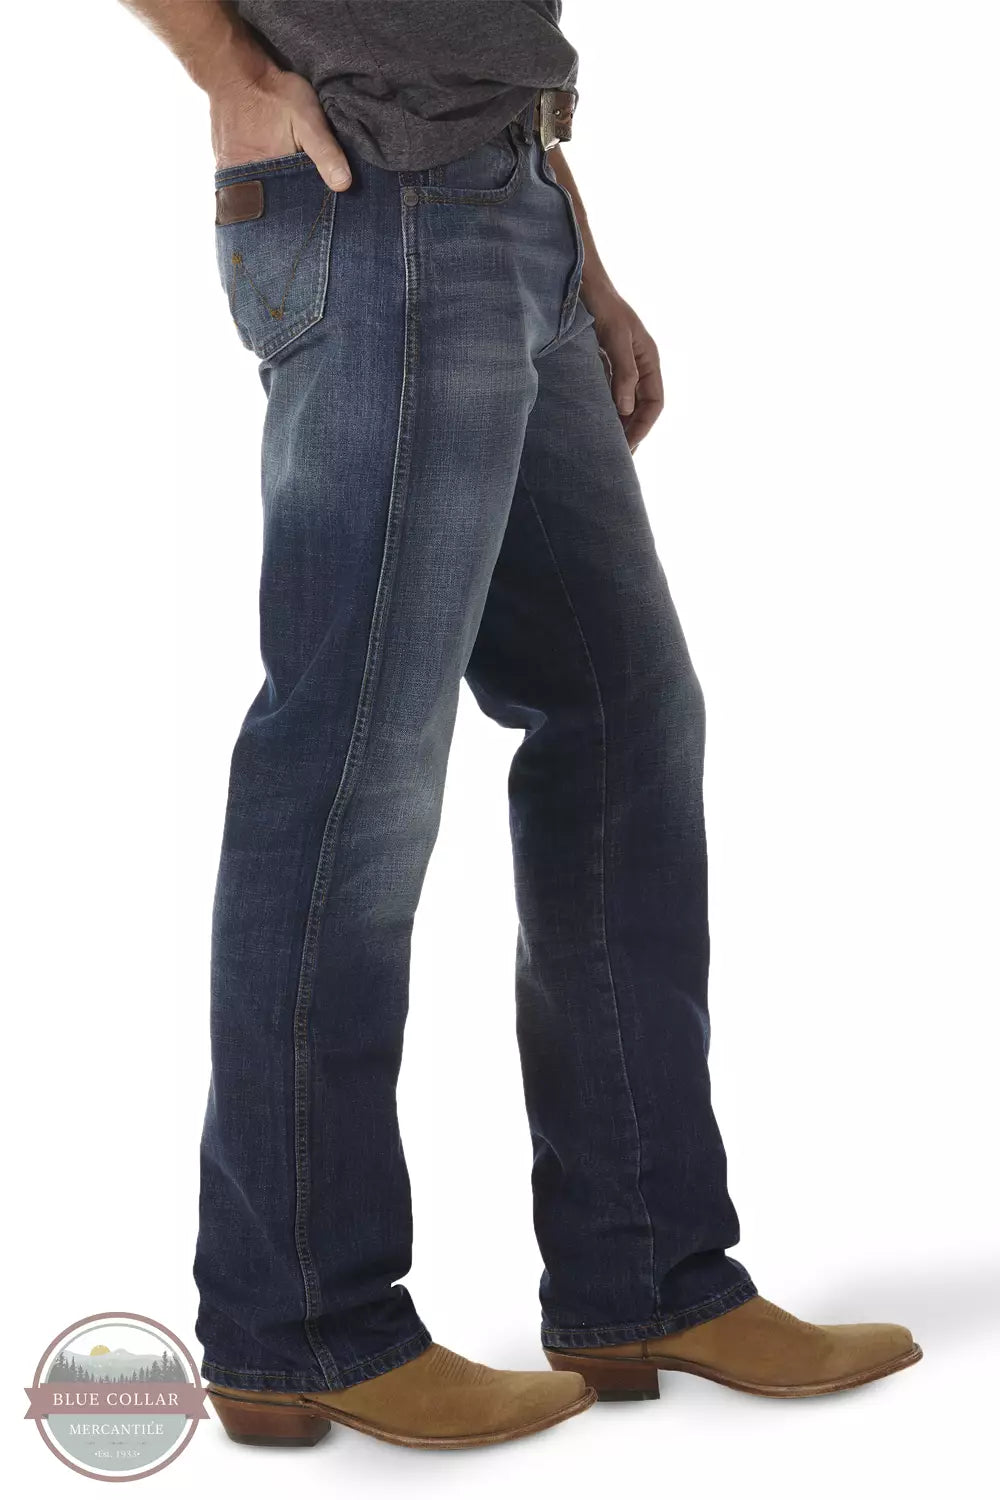 Wrangler WRT20JH Wrangler Retro® Relaxed Boot Cut Jeans in JH Wash Side View